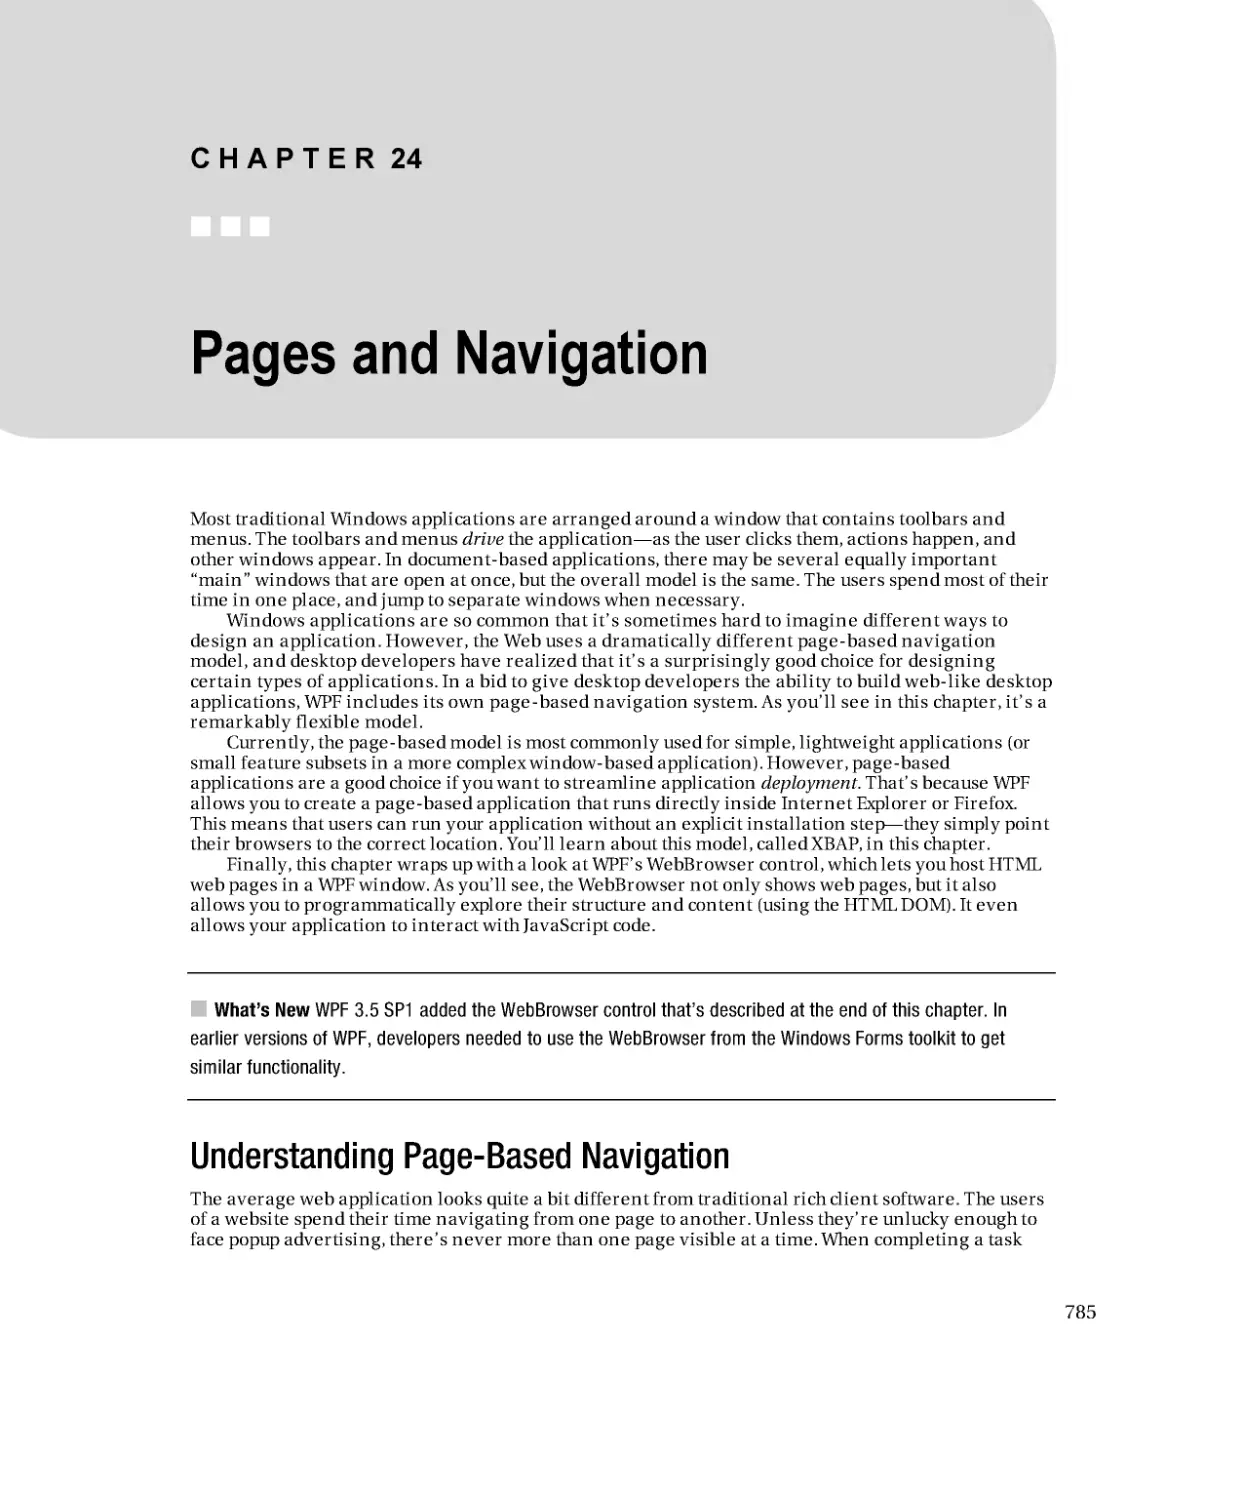 Pages and Navigation